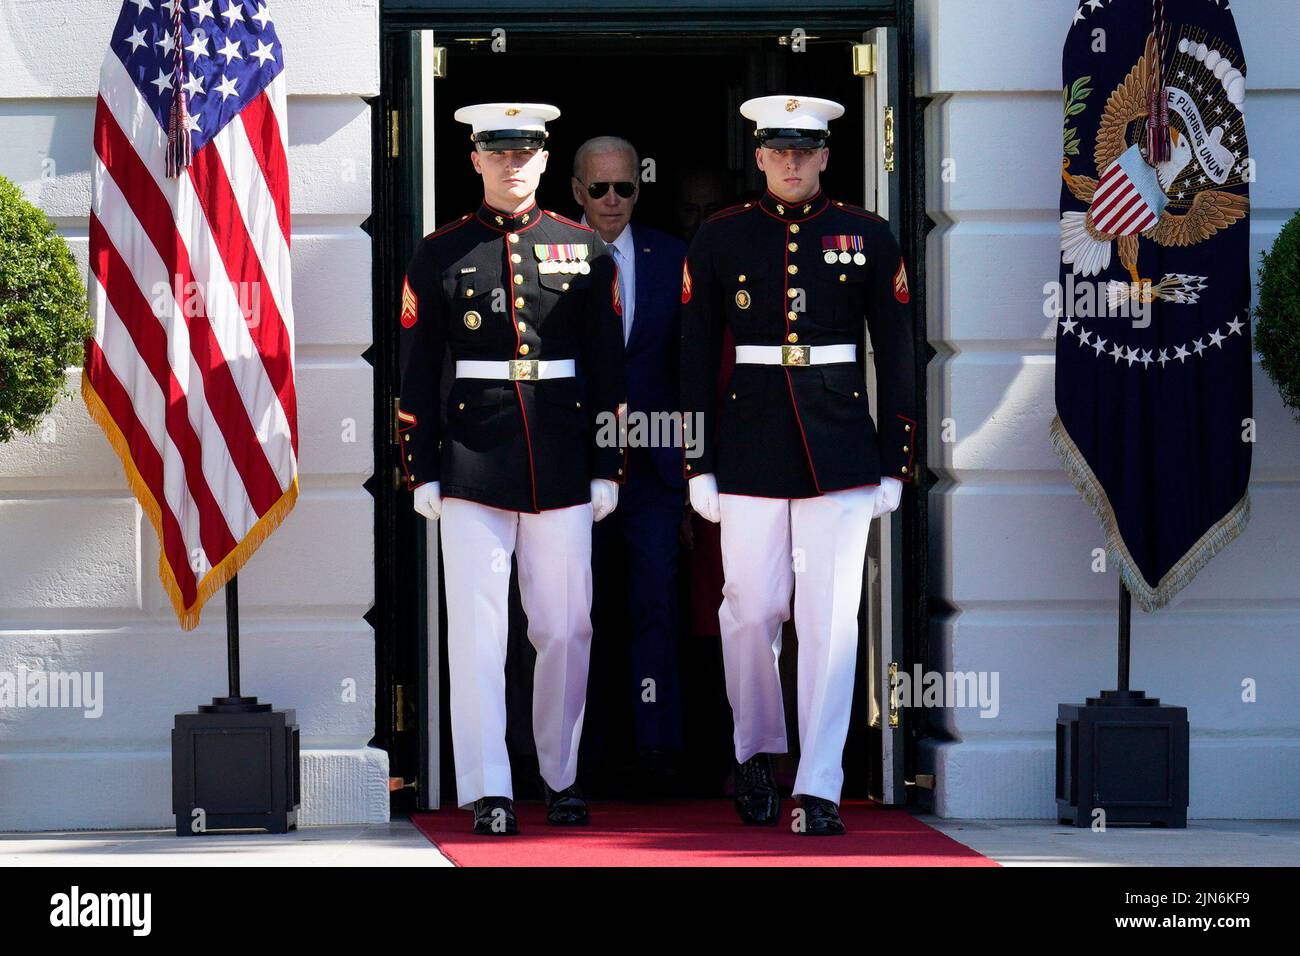 U.S. President Joe Biden walks out behind marines to deliver remarks and sign into law the CHIPS and Science Act during a ceremony on the South Lawn of the White House in Washington on August 9, 2022. Photo by Yuri Gripas/ABACAPRESS.COM Stock Photo